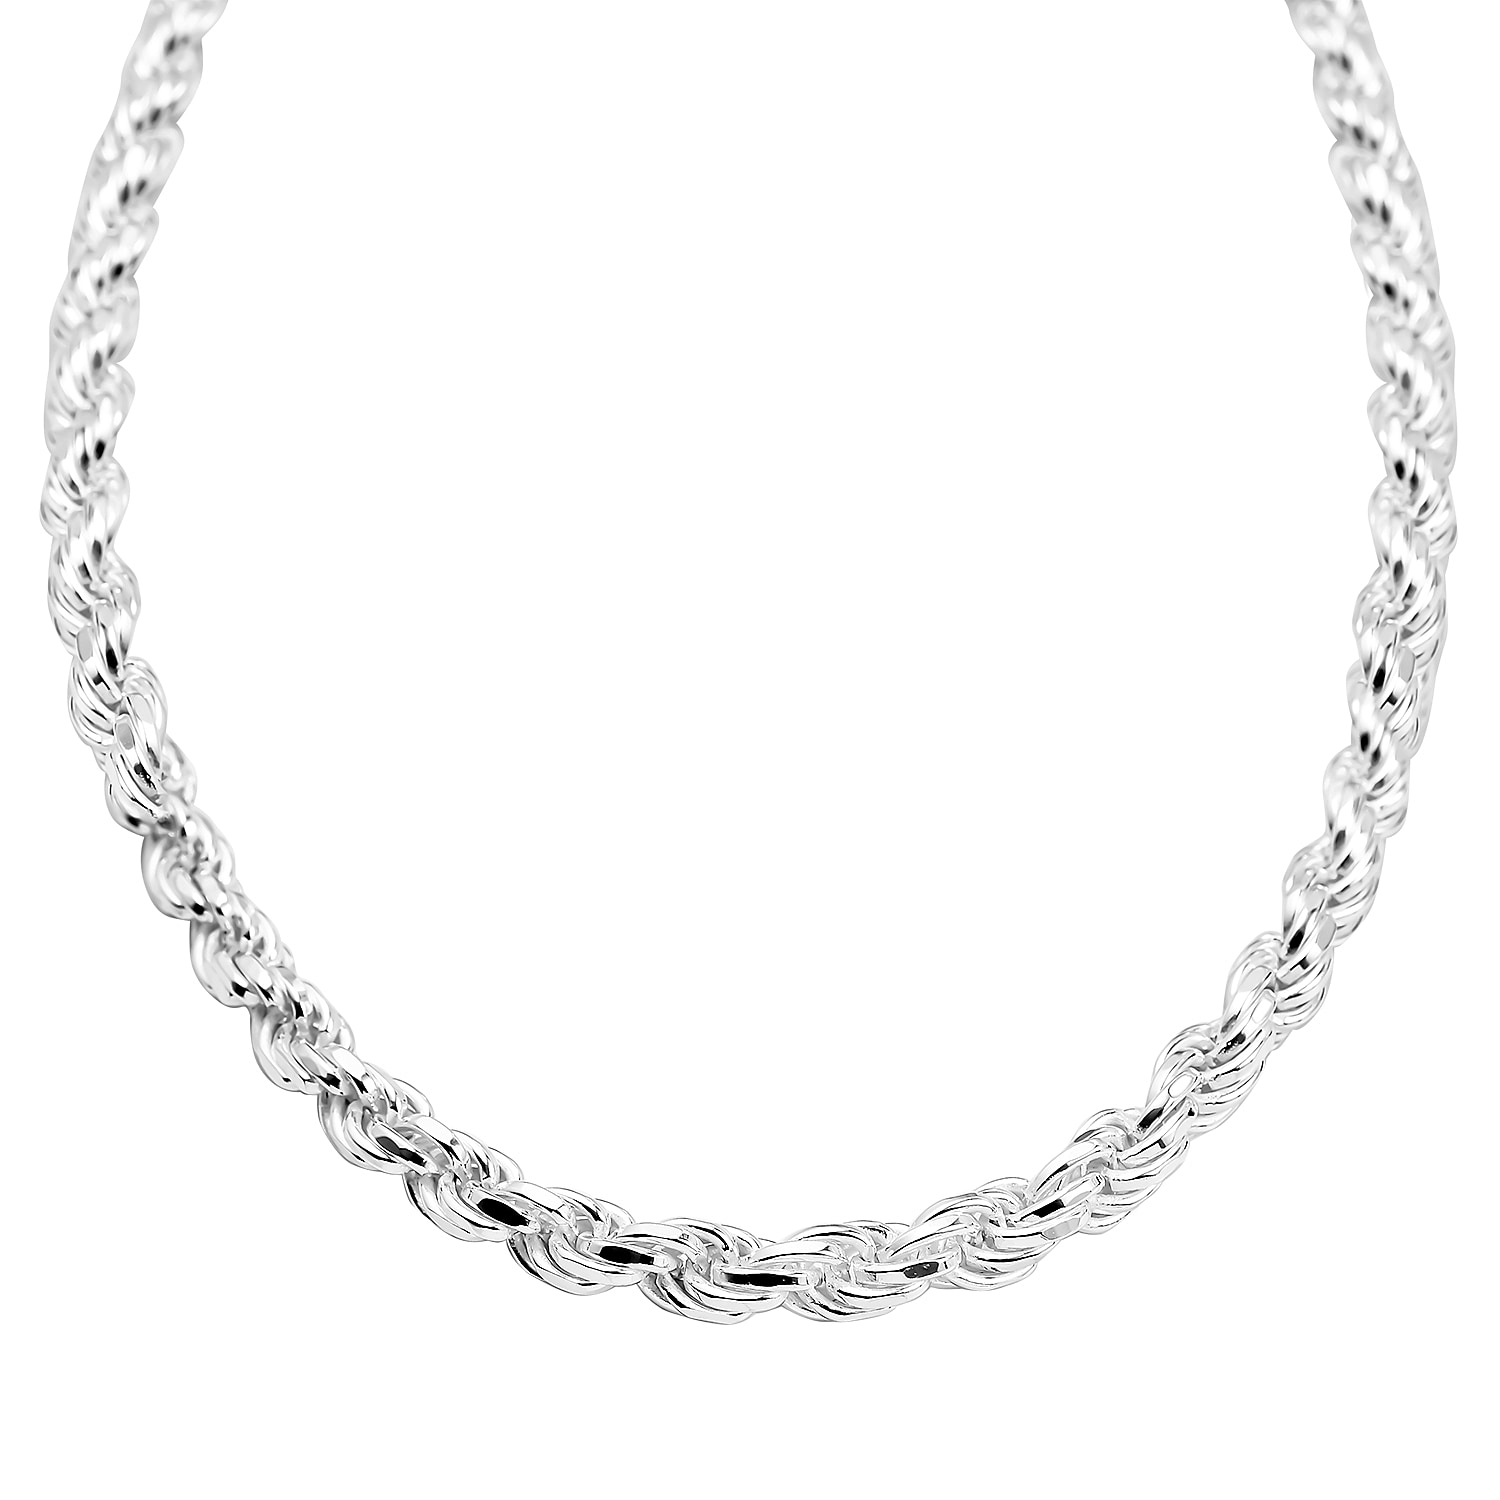 Rhodium Overlay Sterling Silver Rope Necklace (Size - 24), Silver Wt. 66.42 Gms